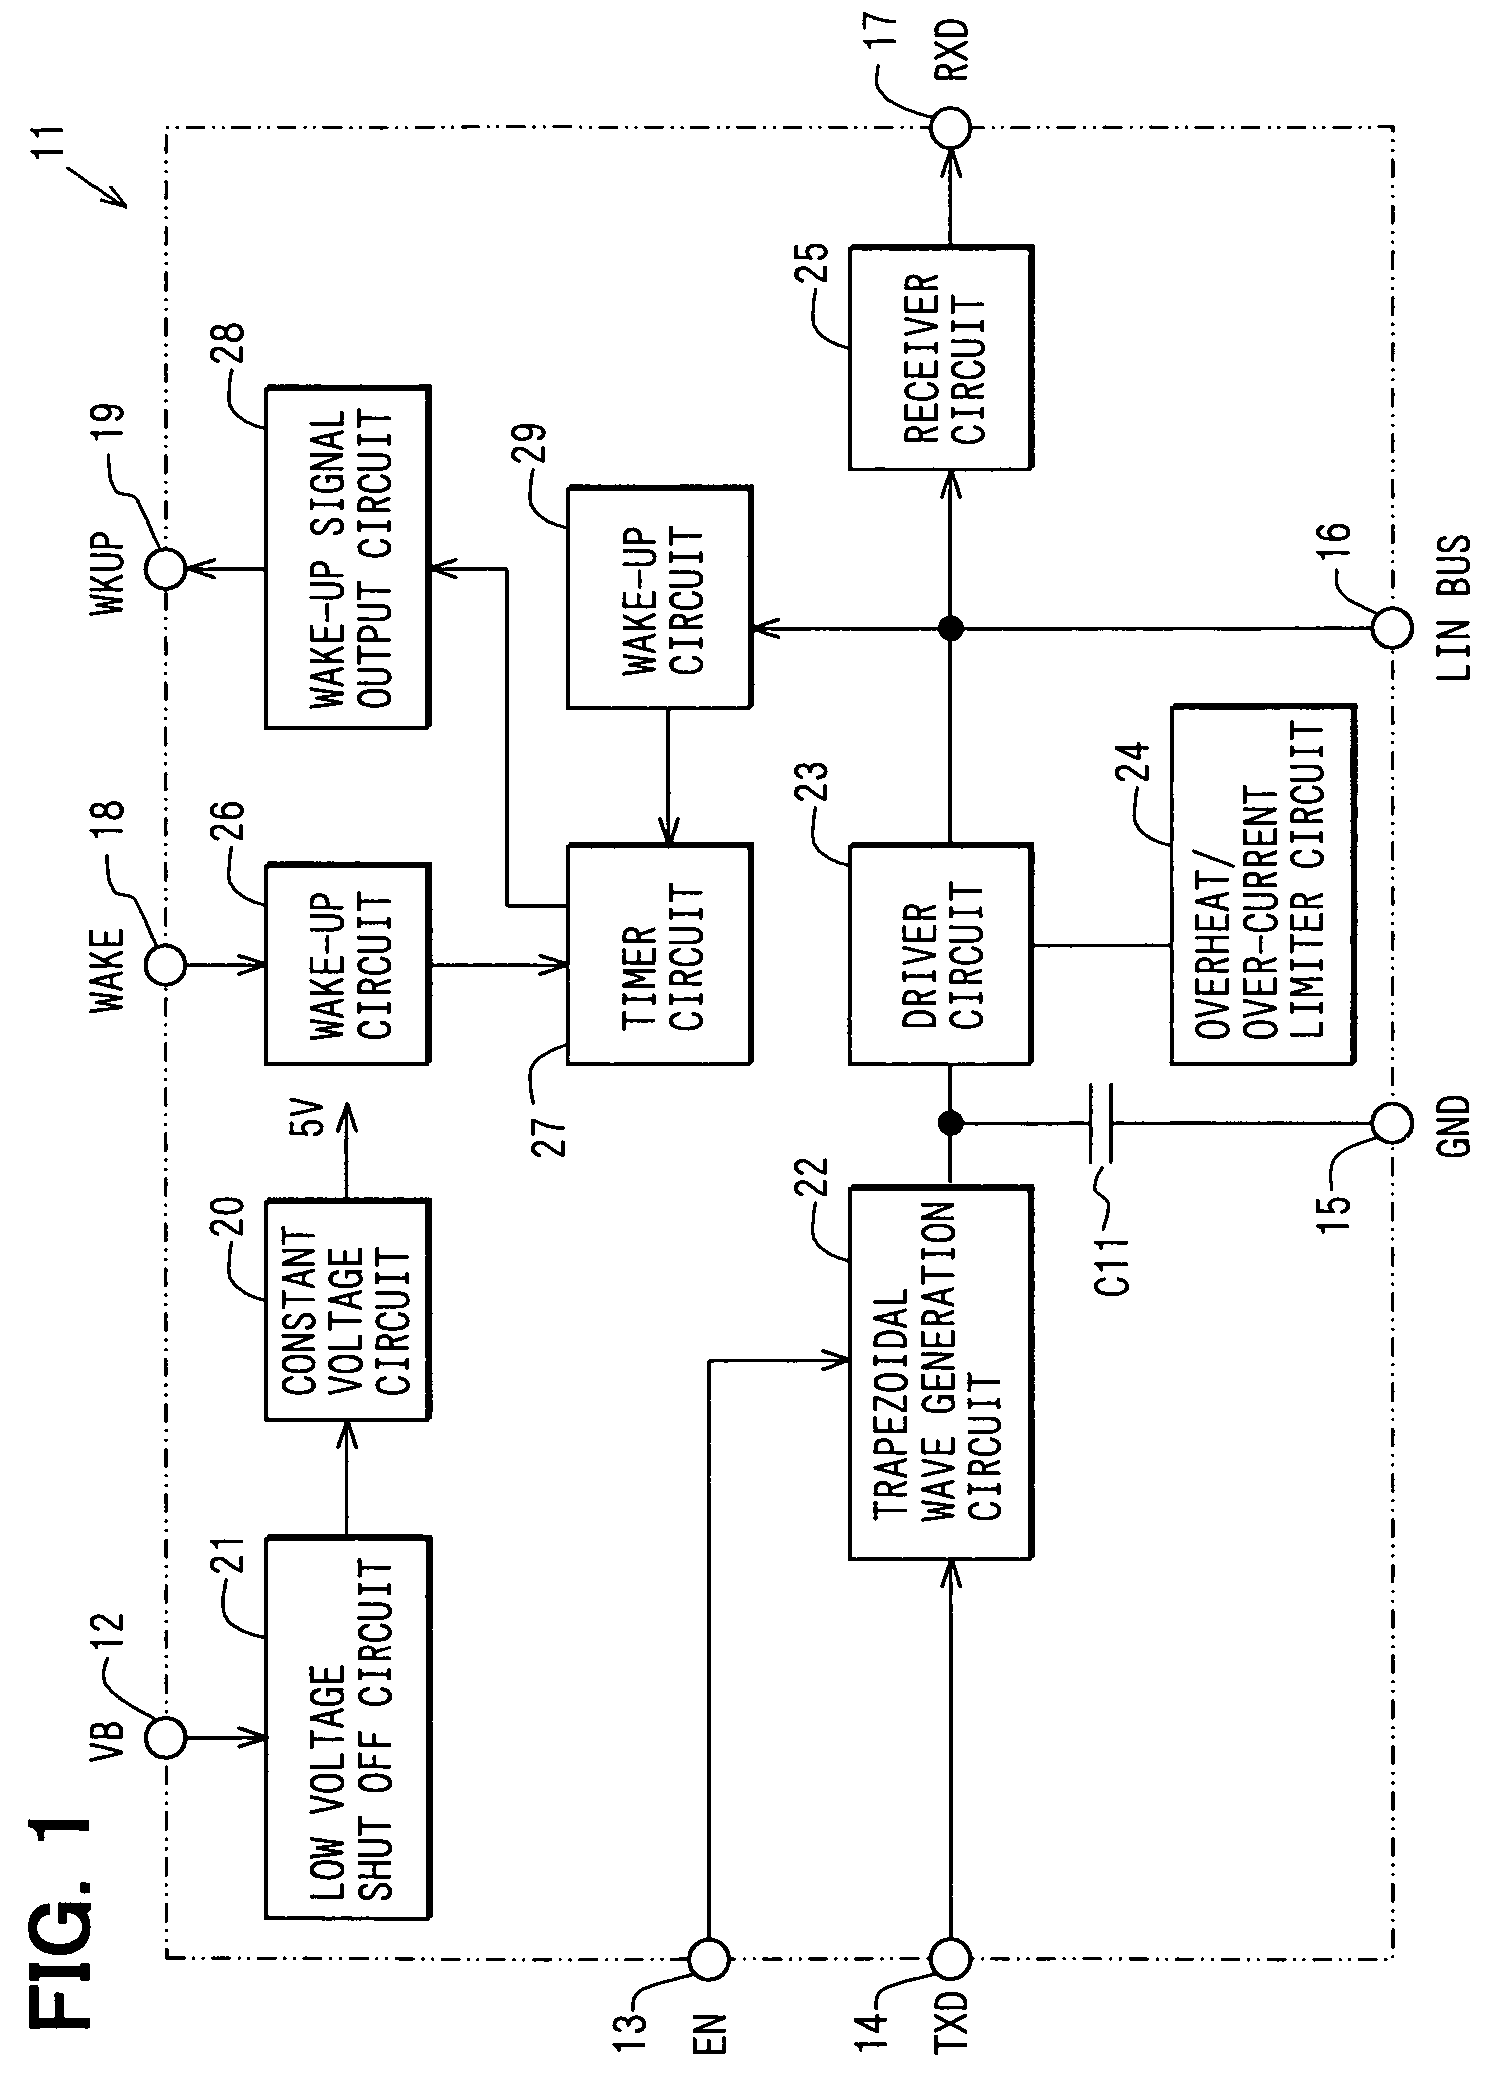 Integrated circuit for transceiver device with means for suppressing superimposed noise and for generating a more accurate output signal